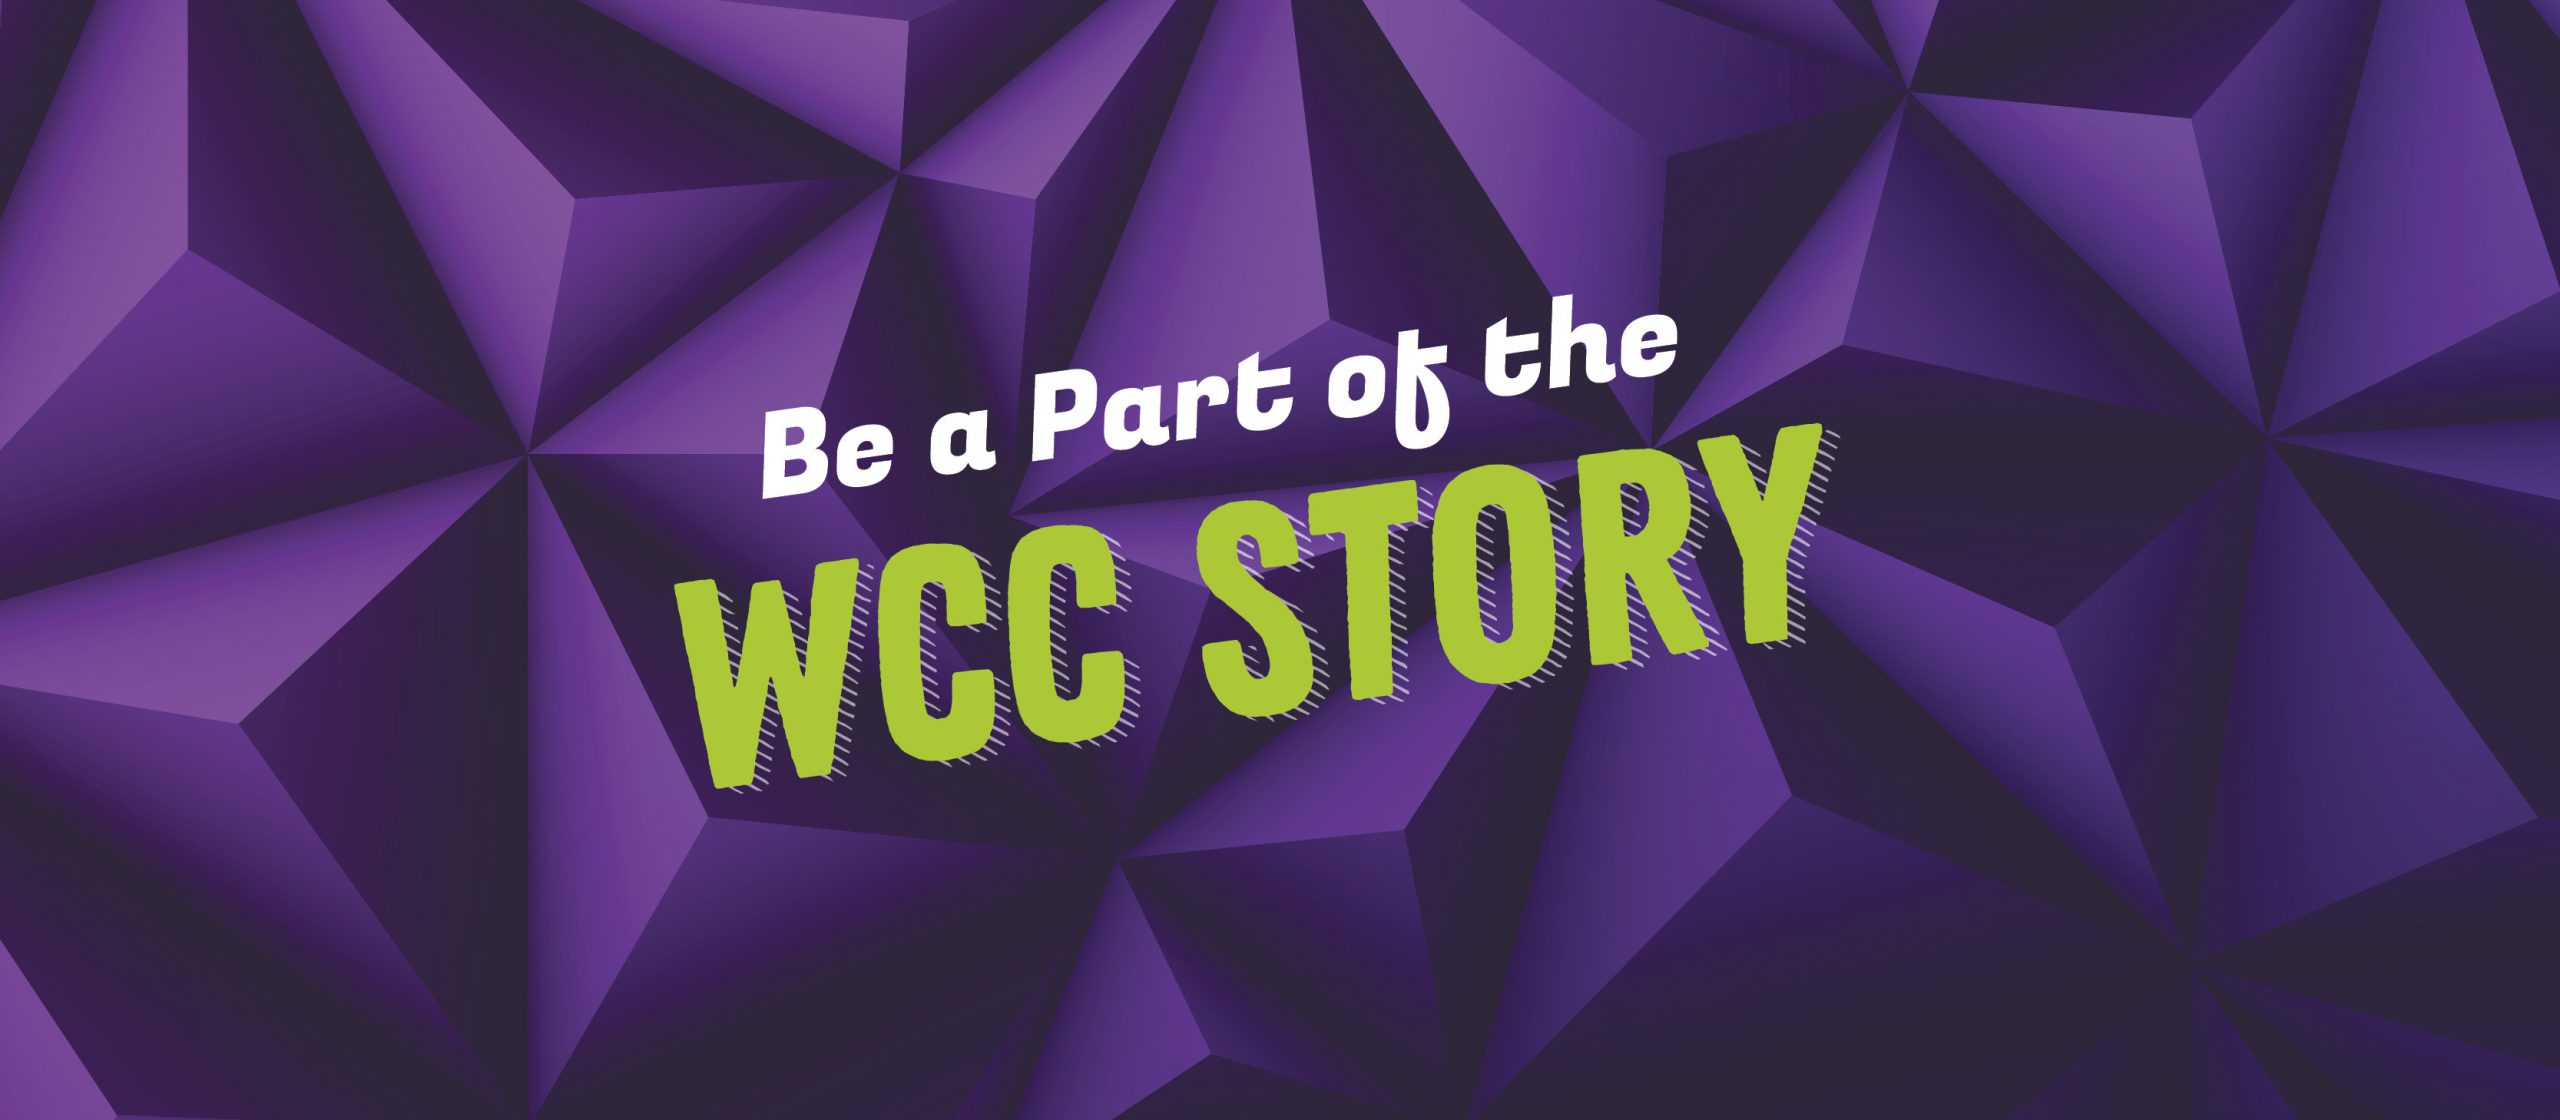 Be a Part of the WCC Story